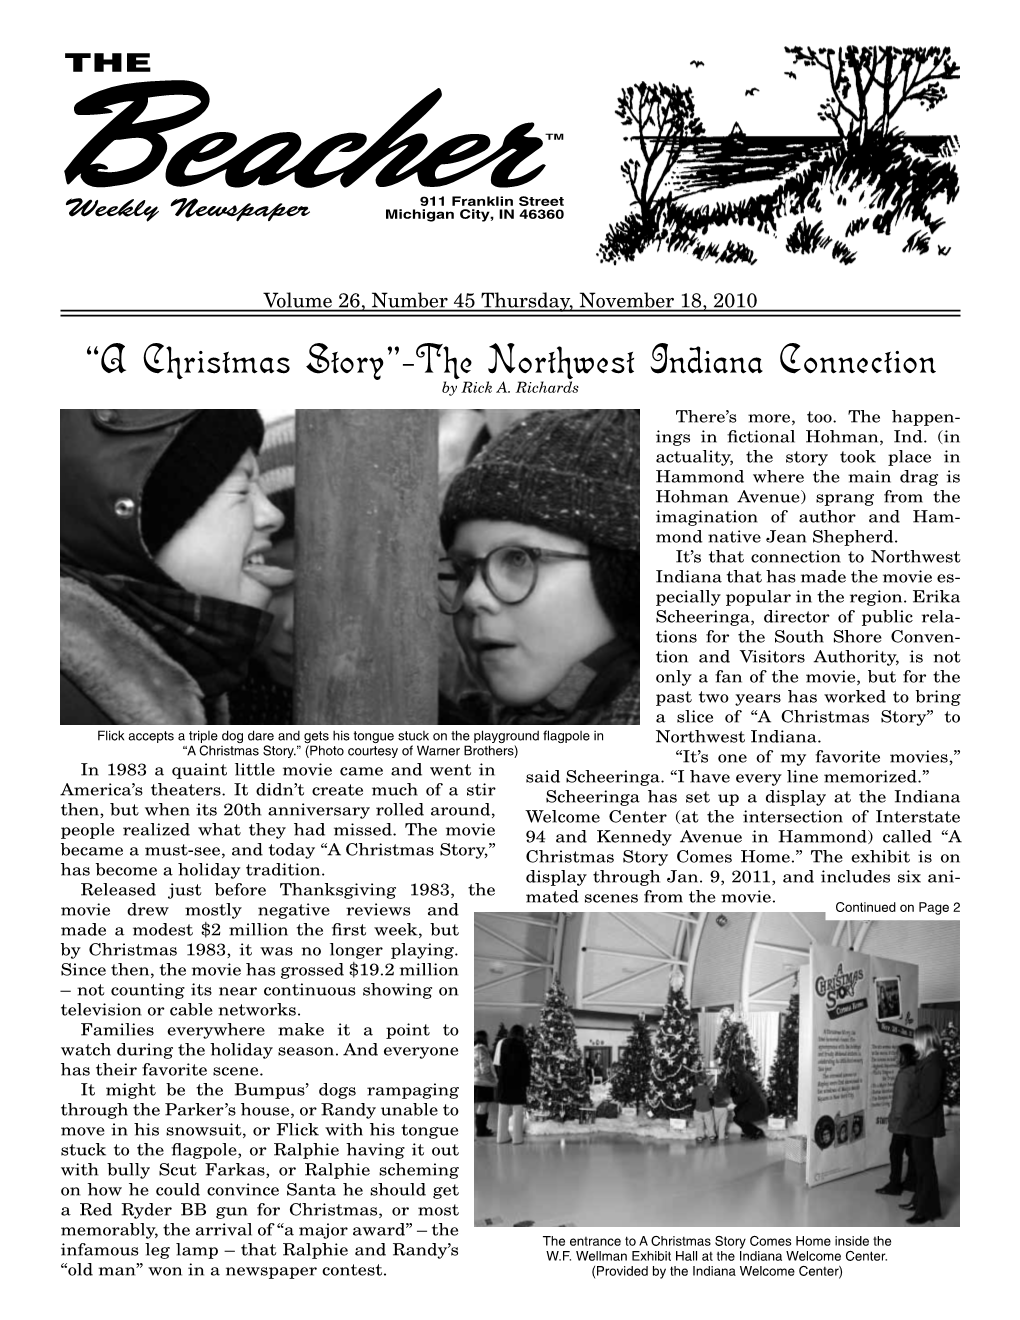 A Christmas Story”-The Northwest Indiana Connection by Rick A